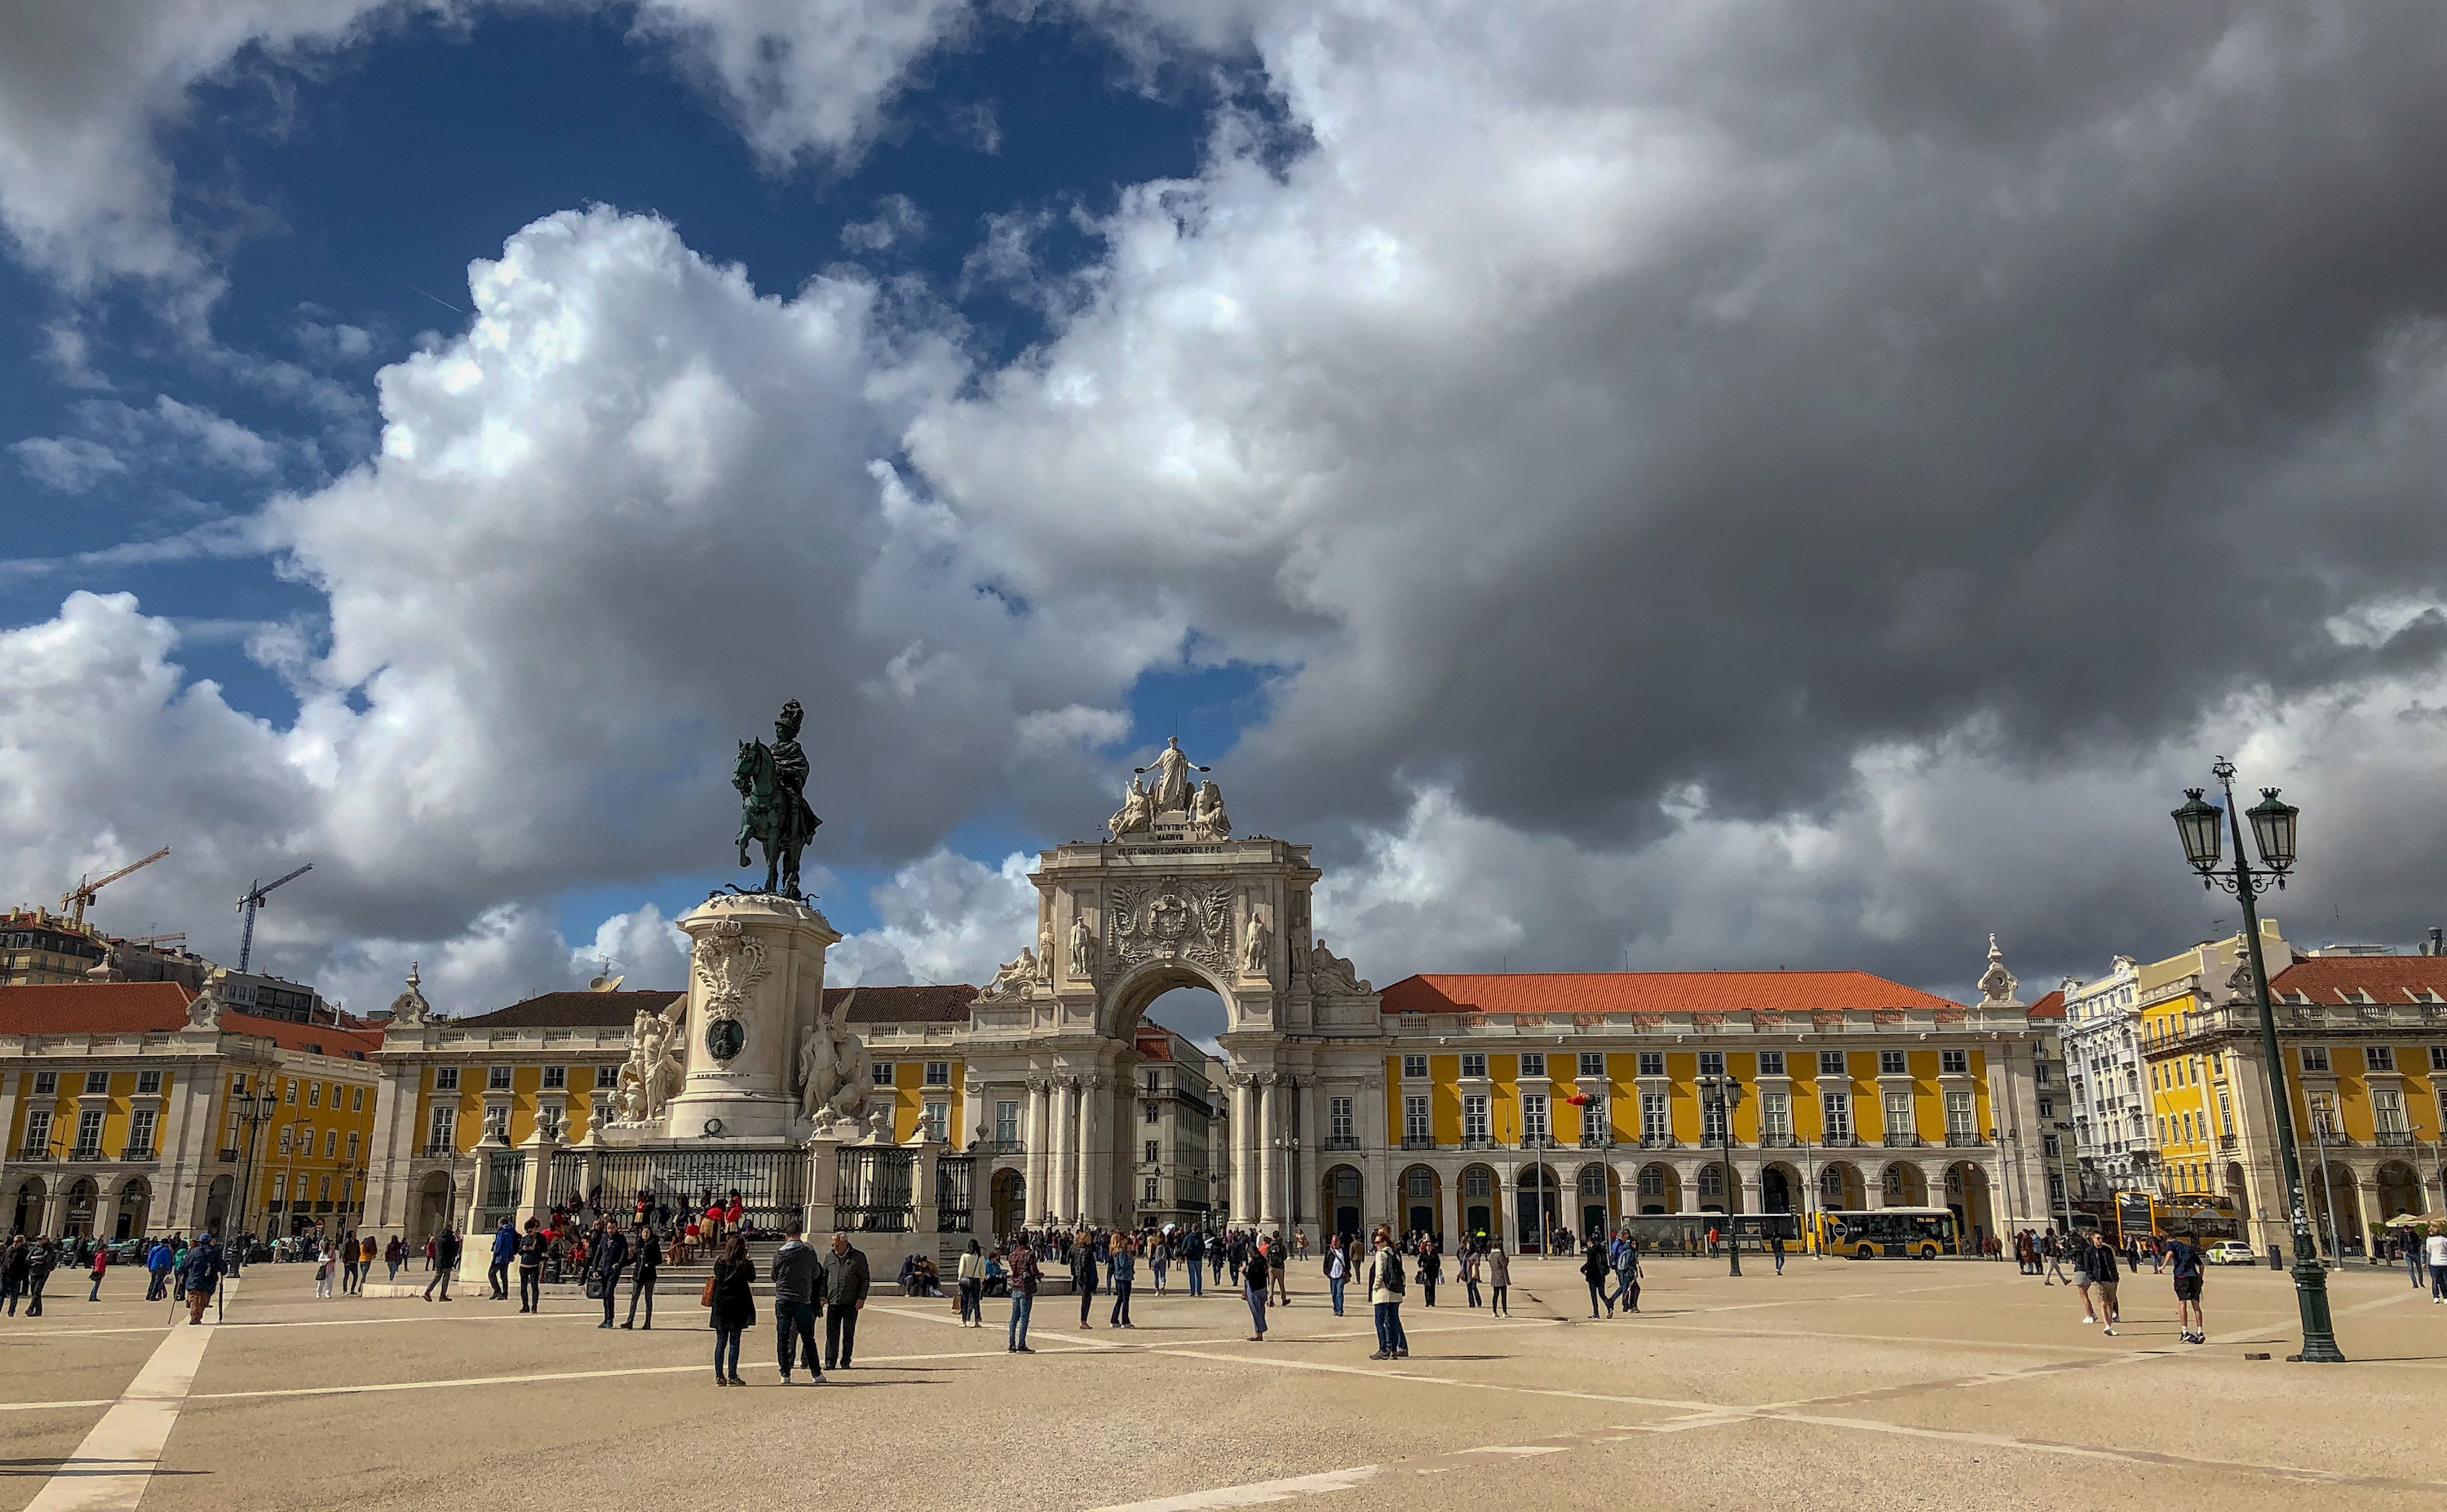 Welcome to Commerce Square / The Praça do Comércio in Lisbon, Portugal. Located on the Tagus river, the square is still commonly known as Terreiro do Paço because it was the location of the Paços da Ribeira (Royal Ribeira Palace) until it was destroyed by the great 1755 Lisbon earthquake.